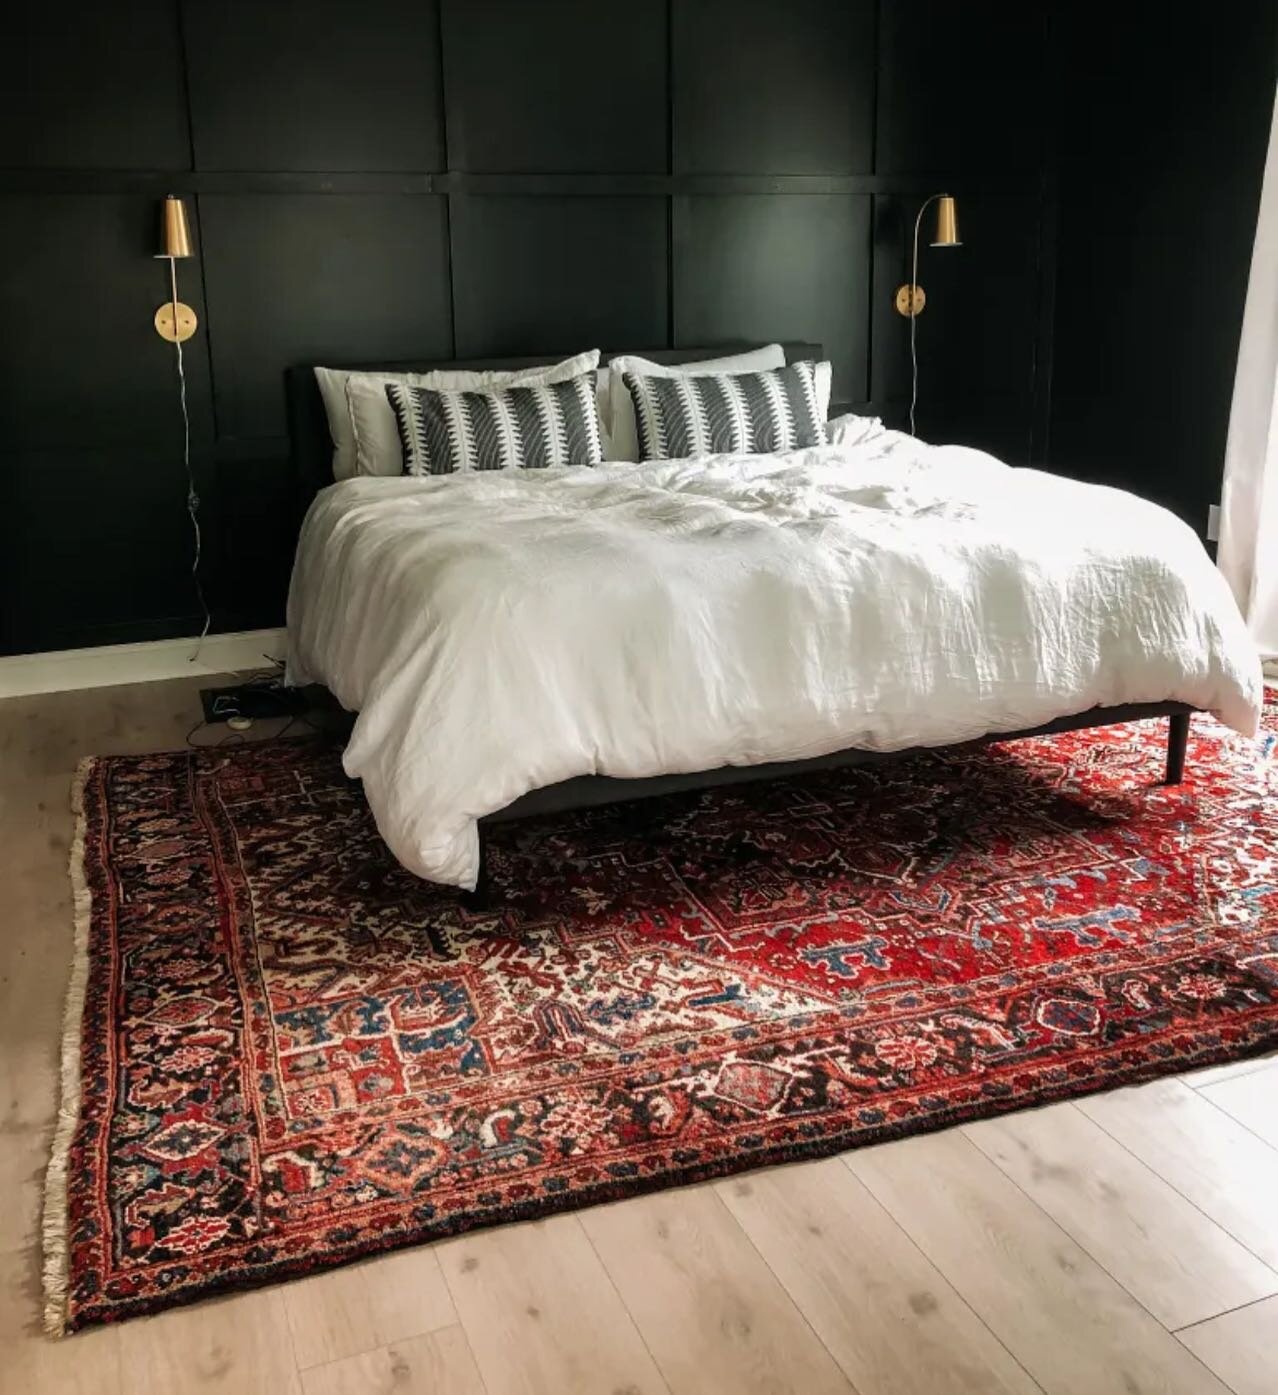 Loving this dark green bedroom. Currently I am working with a client and we are using a dark green like this for her bedroom. Cannot wait to show you all! 

#interiordesign #design #vintage #style #homedecor #home #decor #modern #2022 #inspo #vintage